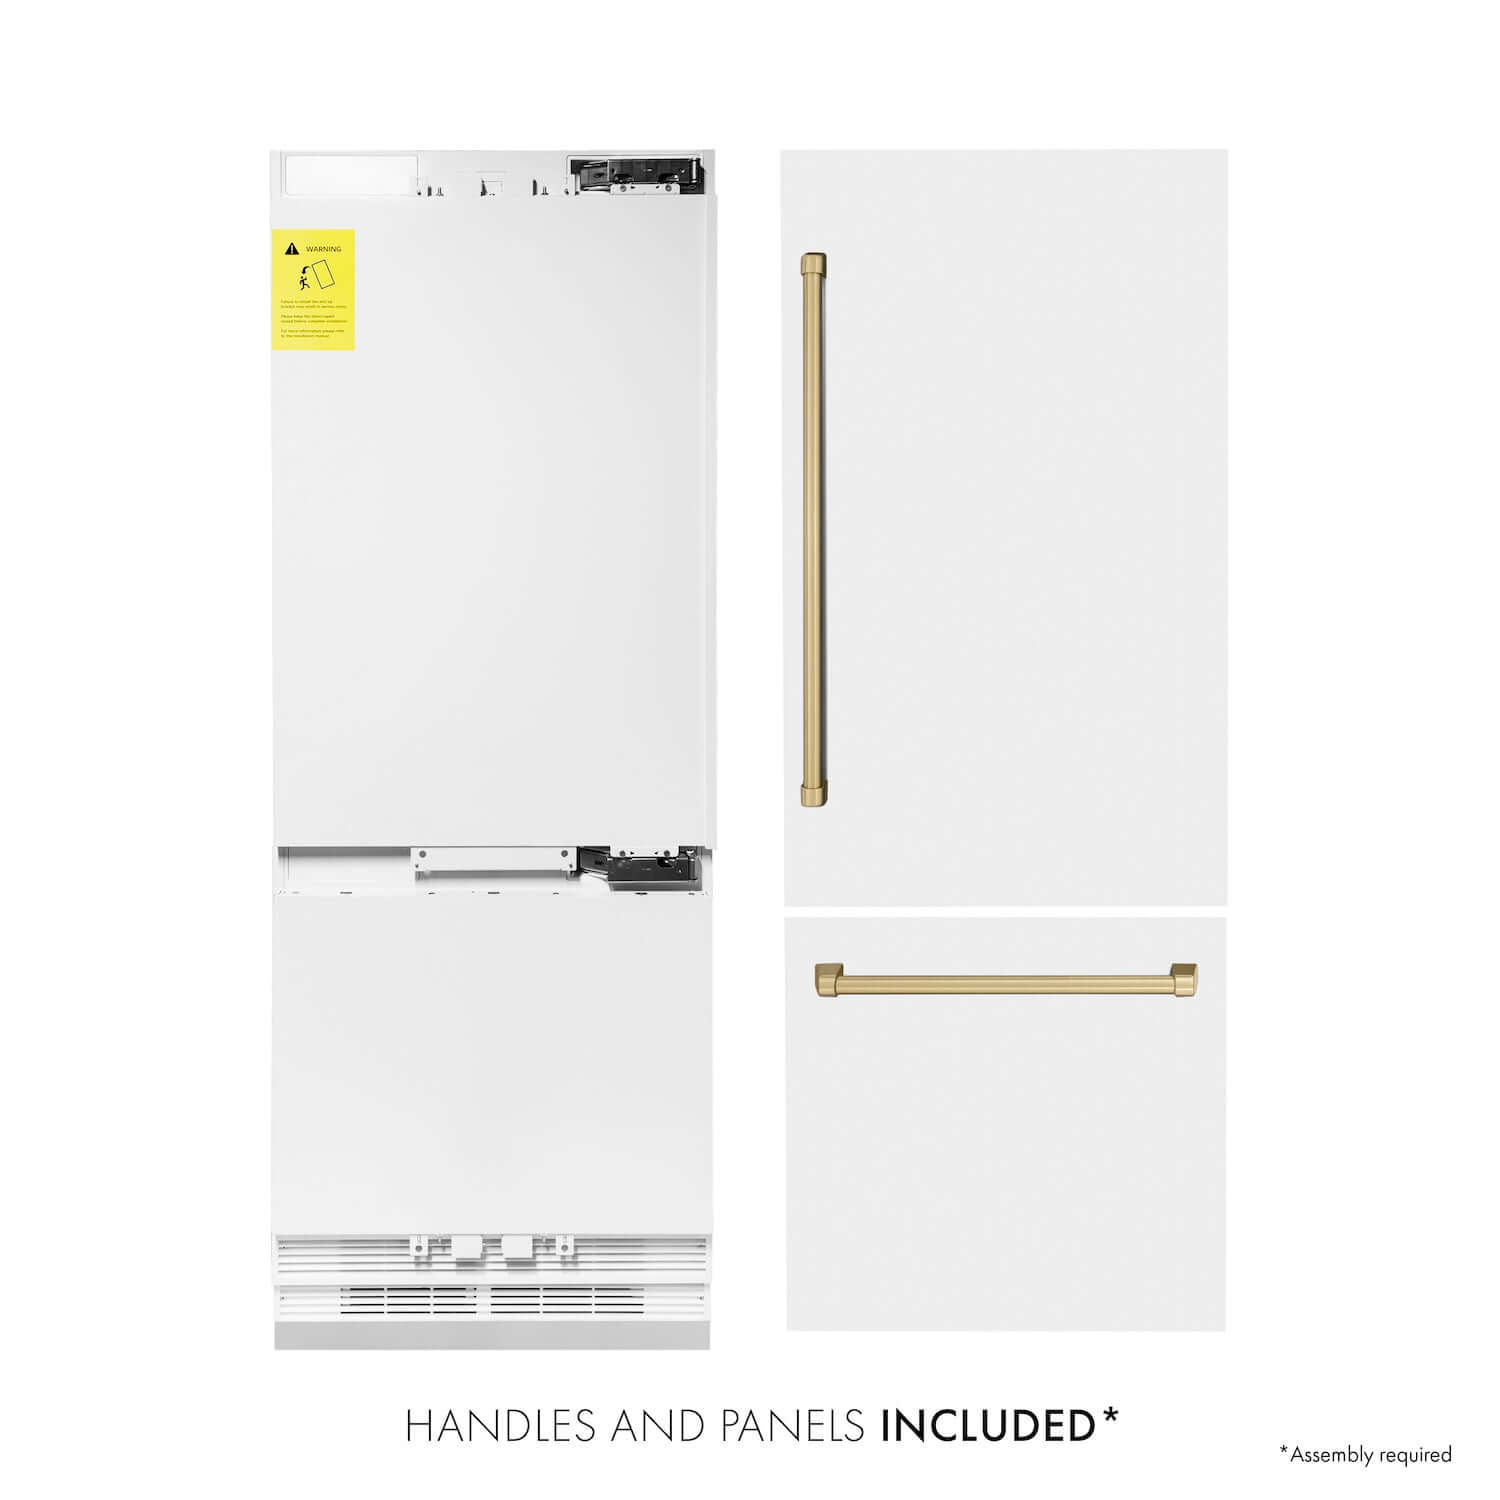 ZLINE Autograph Edition 30 in. 16.1 cu. ft. Built-in 2-Door Bottom Freezer Refrigerator with Internal Water and Ice Dispenser in White Matte with Champagne Bronze Accents (RBIVZ-WM-30-CB) front, refrigeration unit, panels, and handles separated .